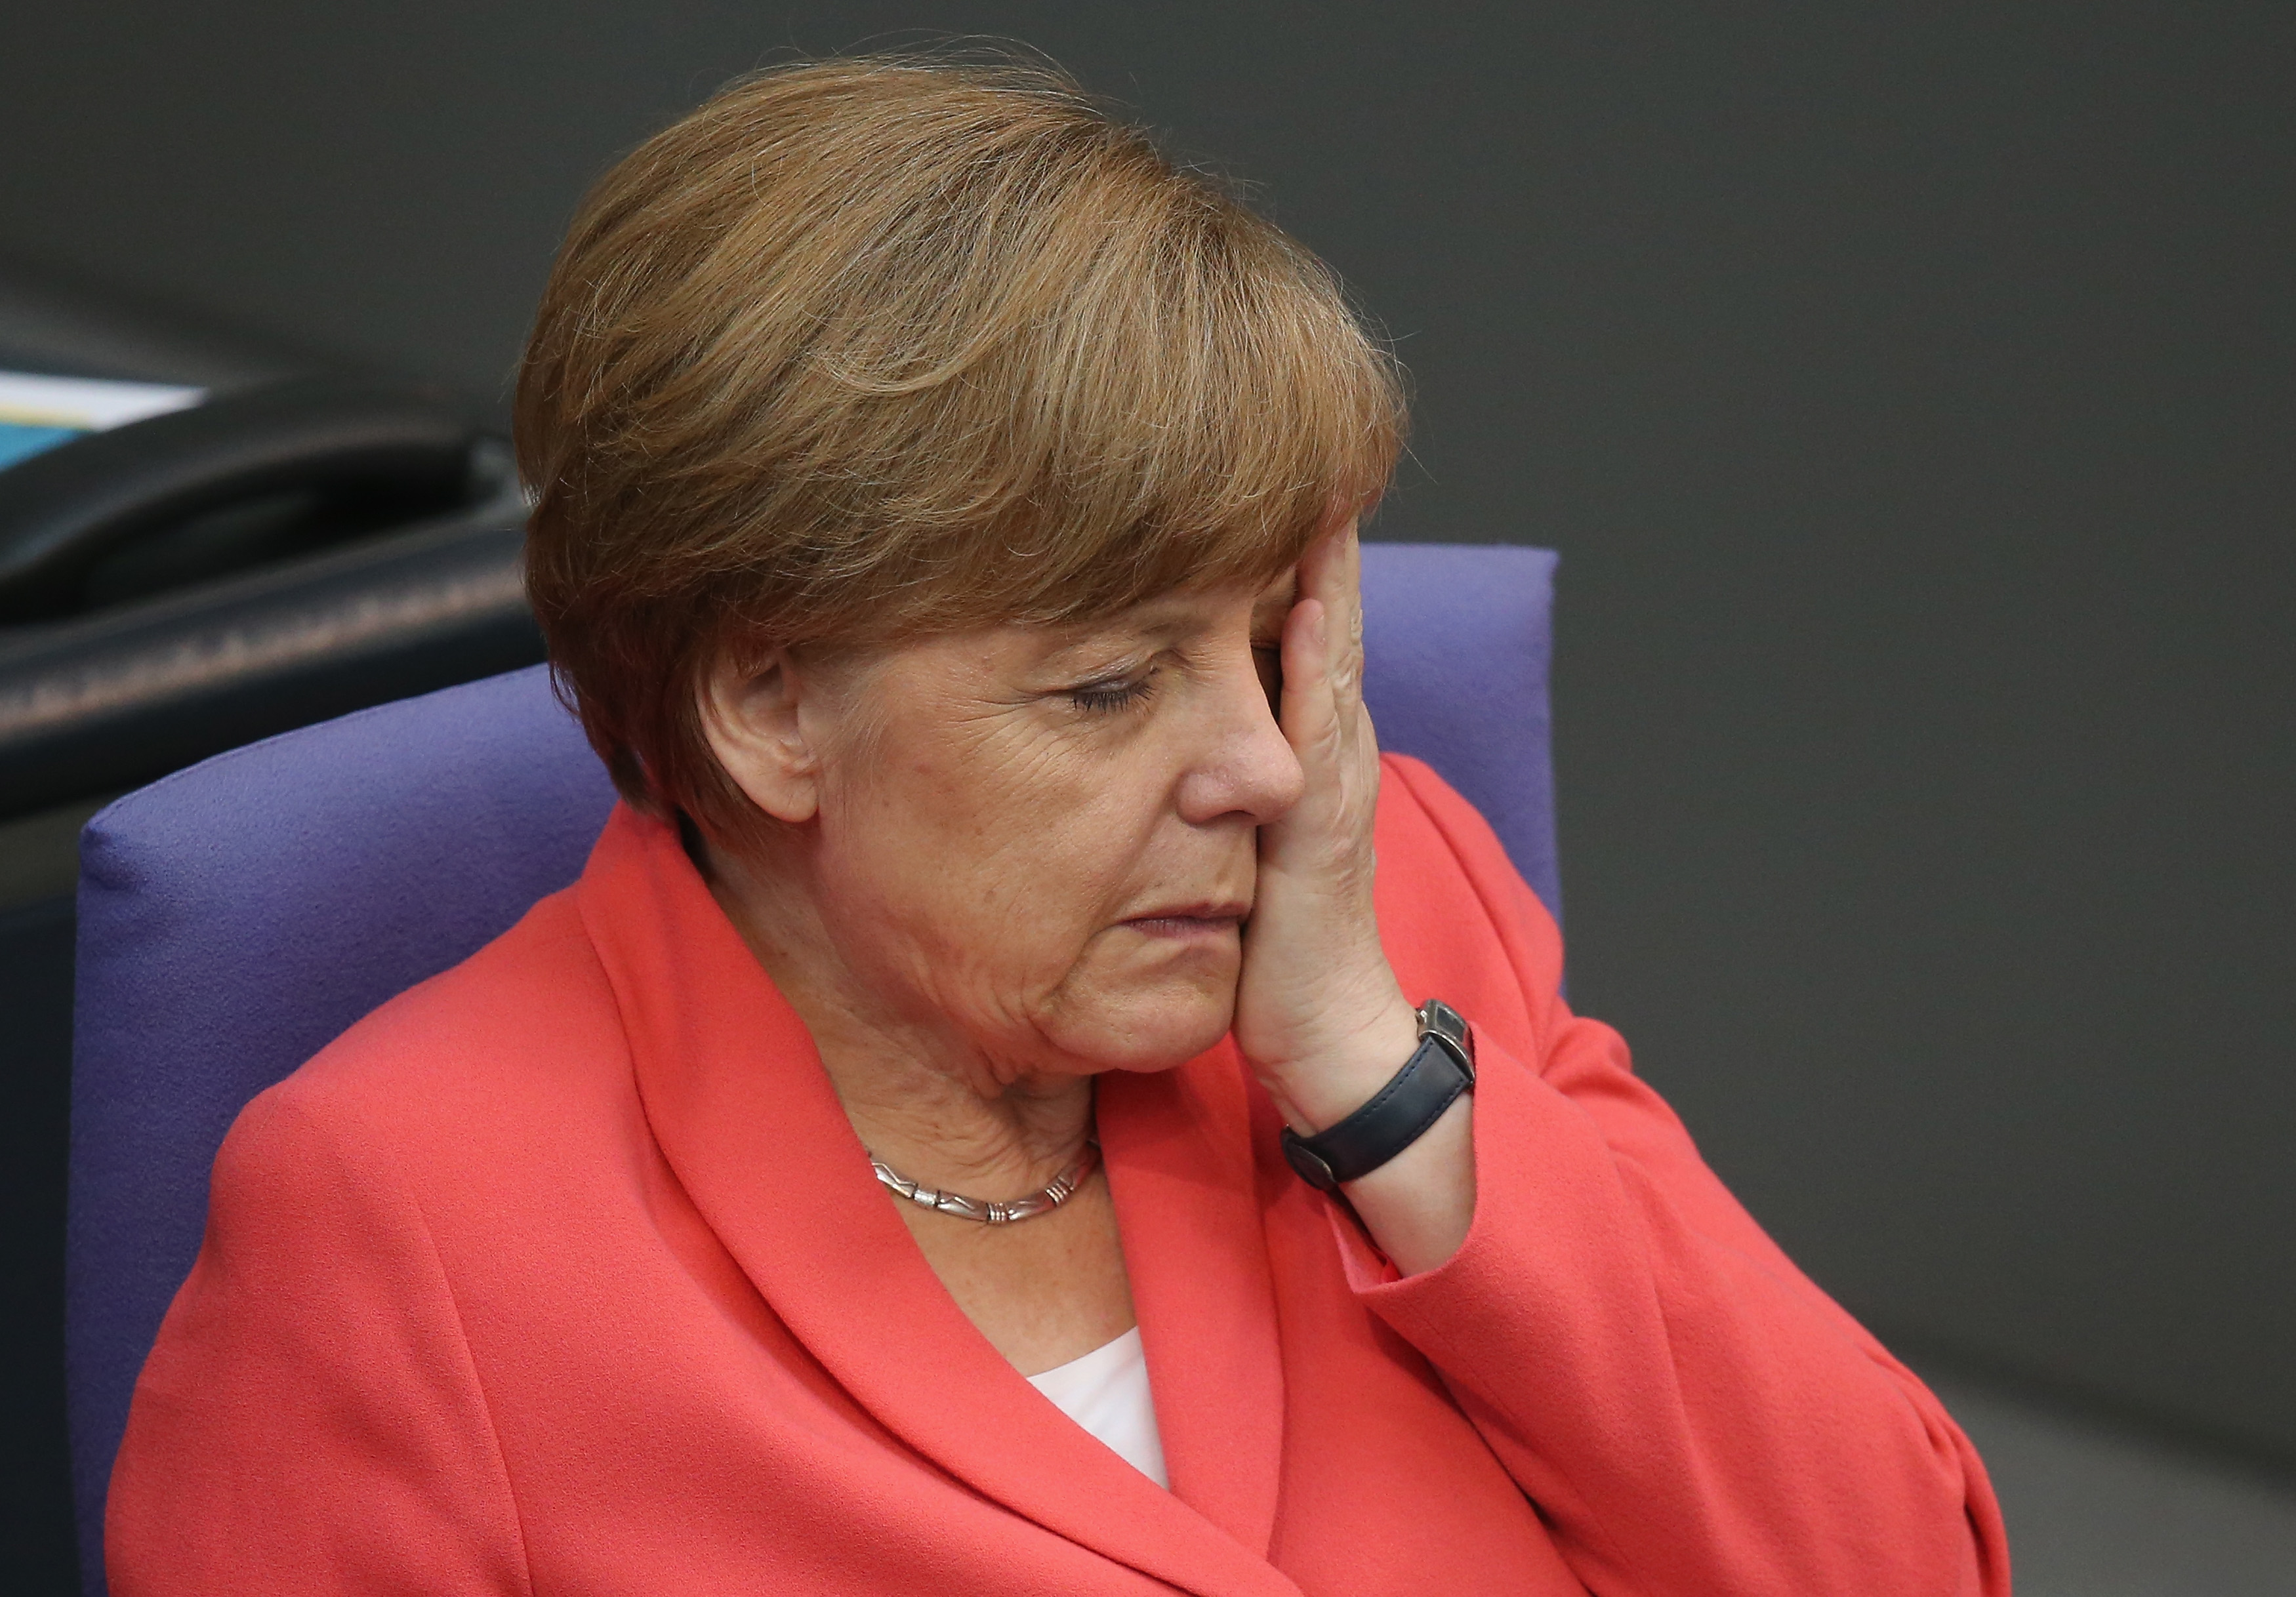 BERLIN, GERMANY - JULY 17: German Chancellor Angela Merkel attends debates prior to a vote over the third EU financial aid package to Greece at an extraordinary session of the German parliament, the Bundestag, on July 17, 2015 in Berlin, Germany. The Bundestag is among several European parliaments that must vote on whether to allow negotations over the aid package that will help Greece to avert state bankruptcy and shore up the Greek banking system. (Photo by Sean Gallup/Getty Images)